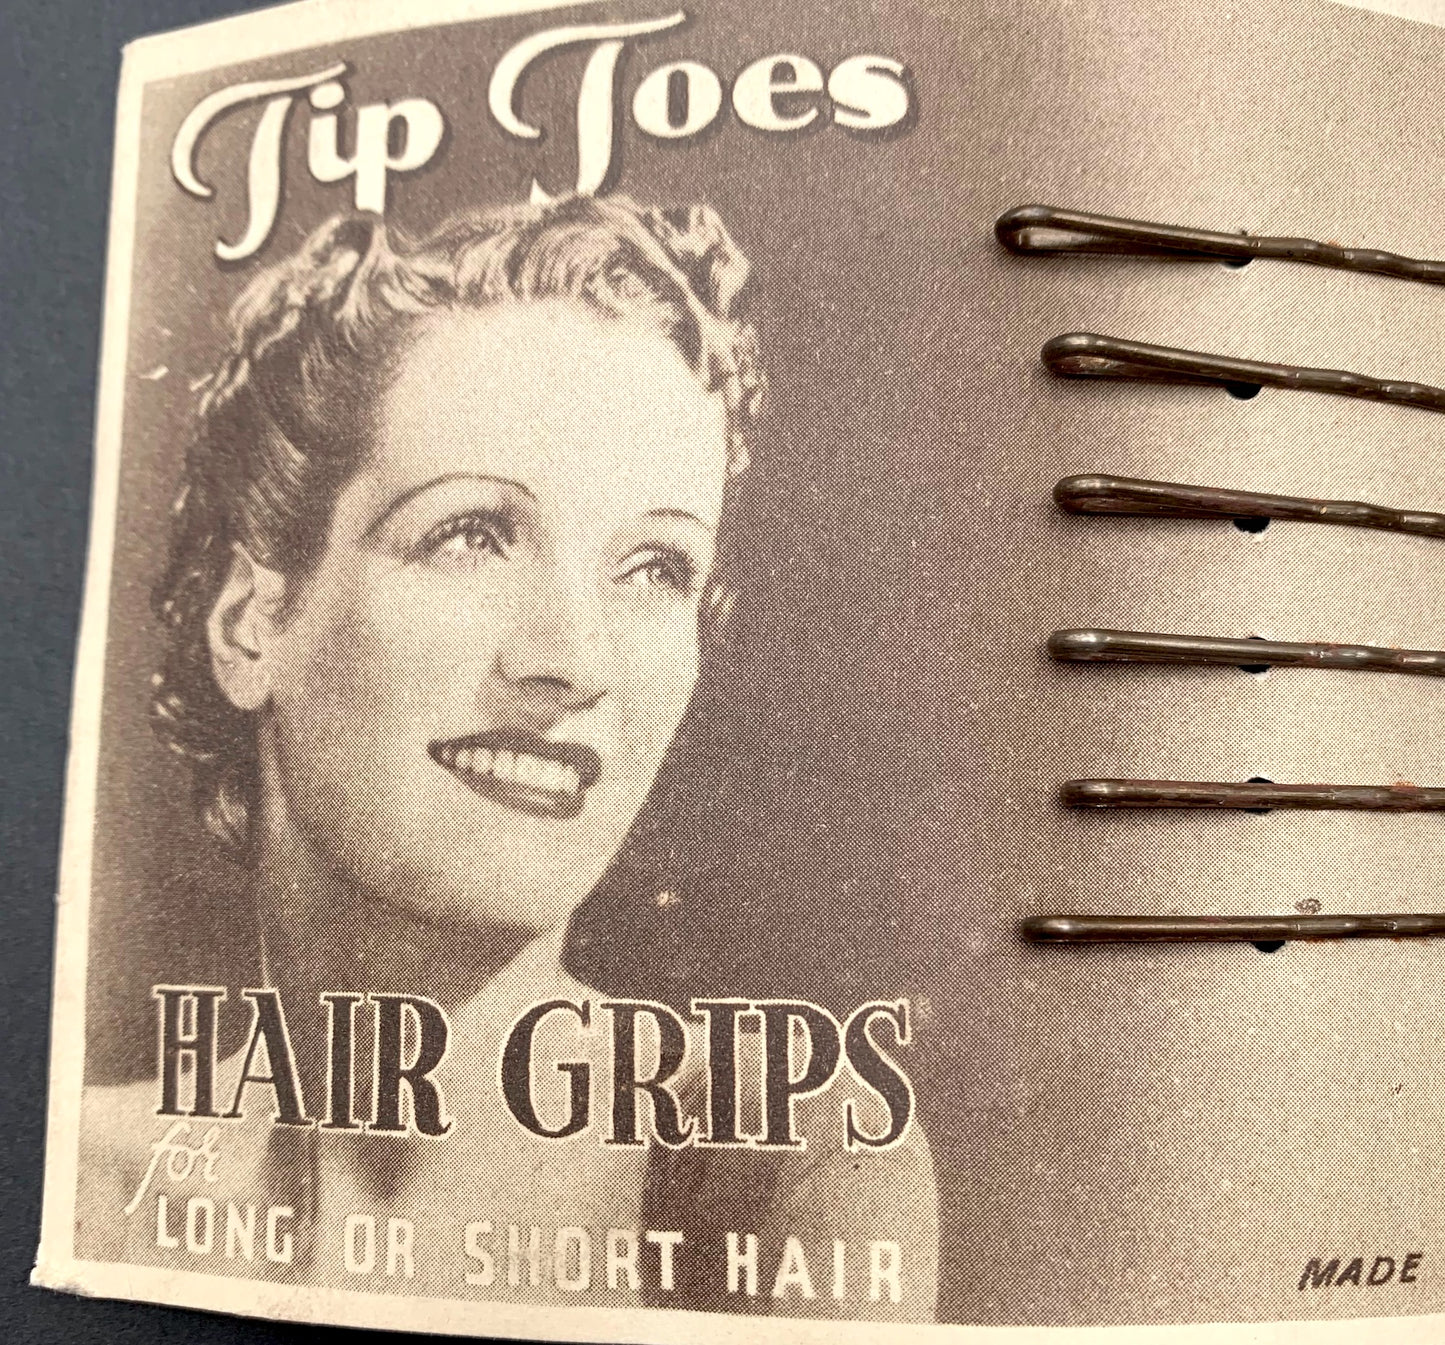 Tip Toes 1940s HAIR GRIPS  for Long or Short Hair  Made in England